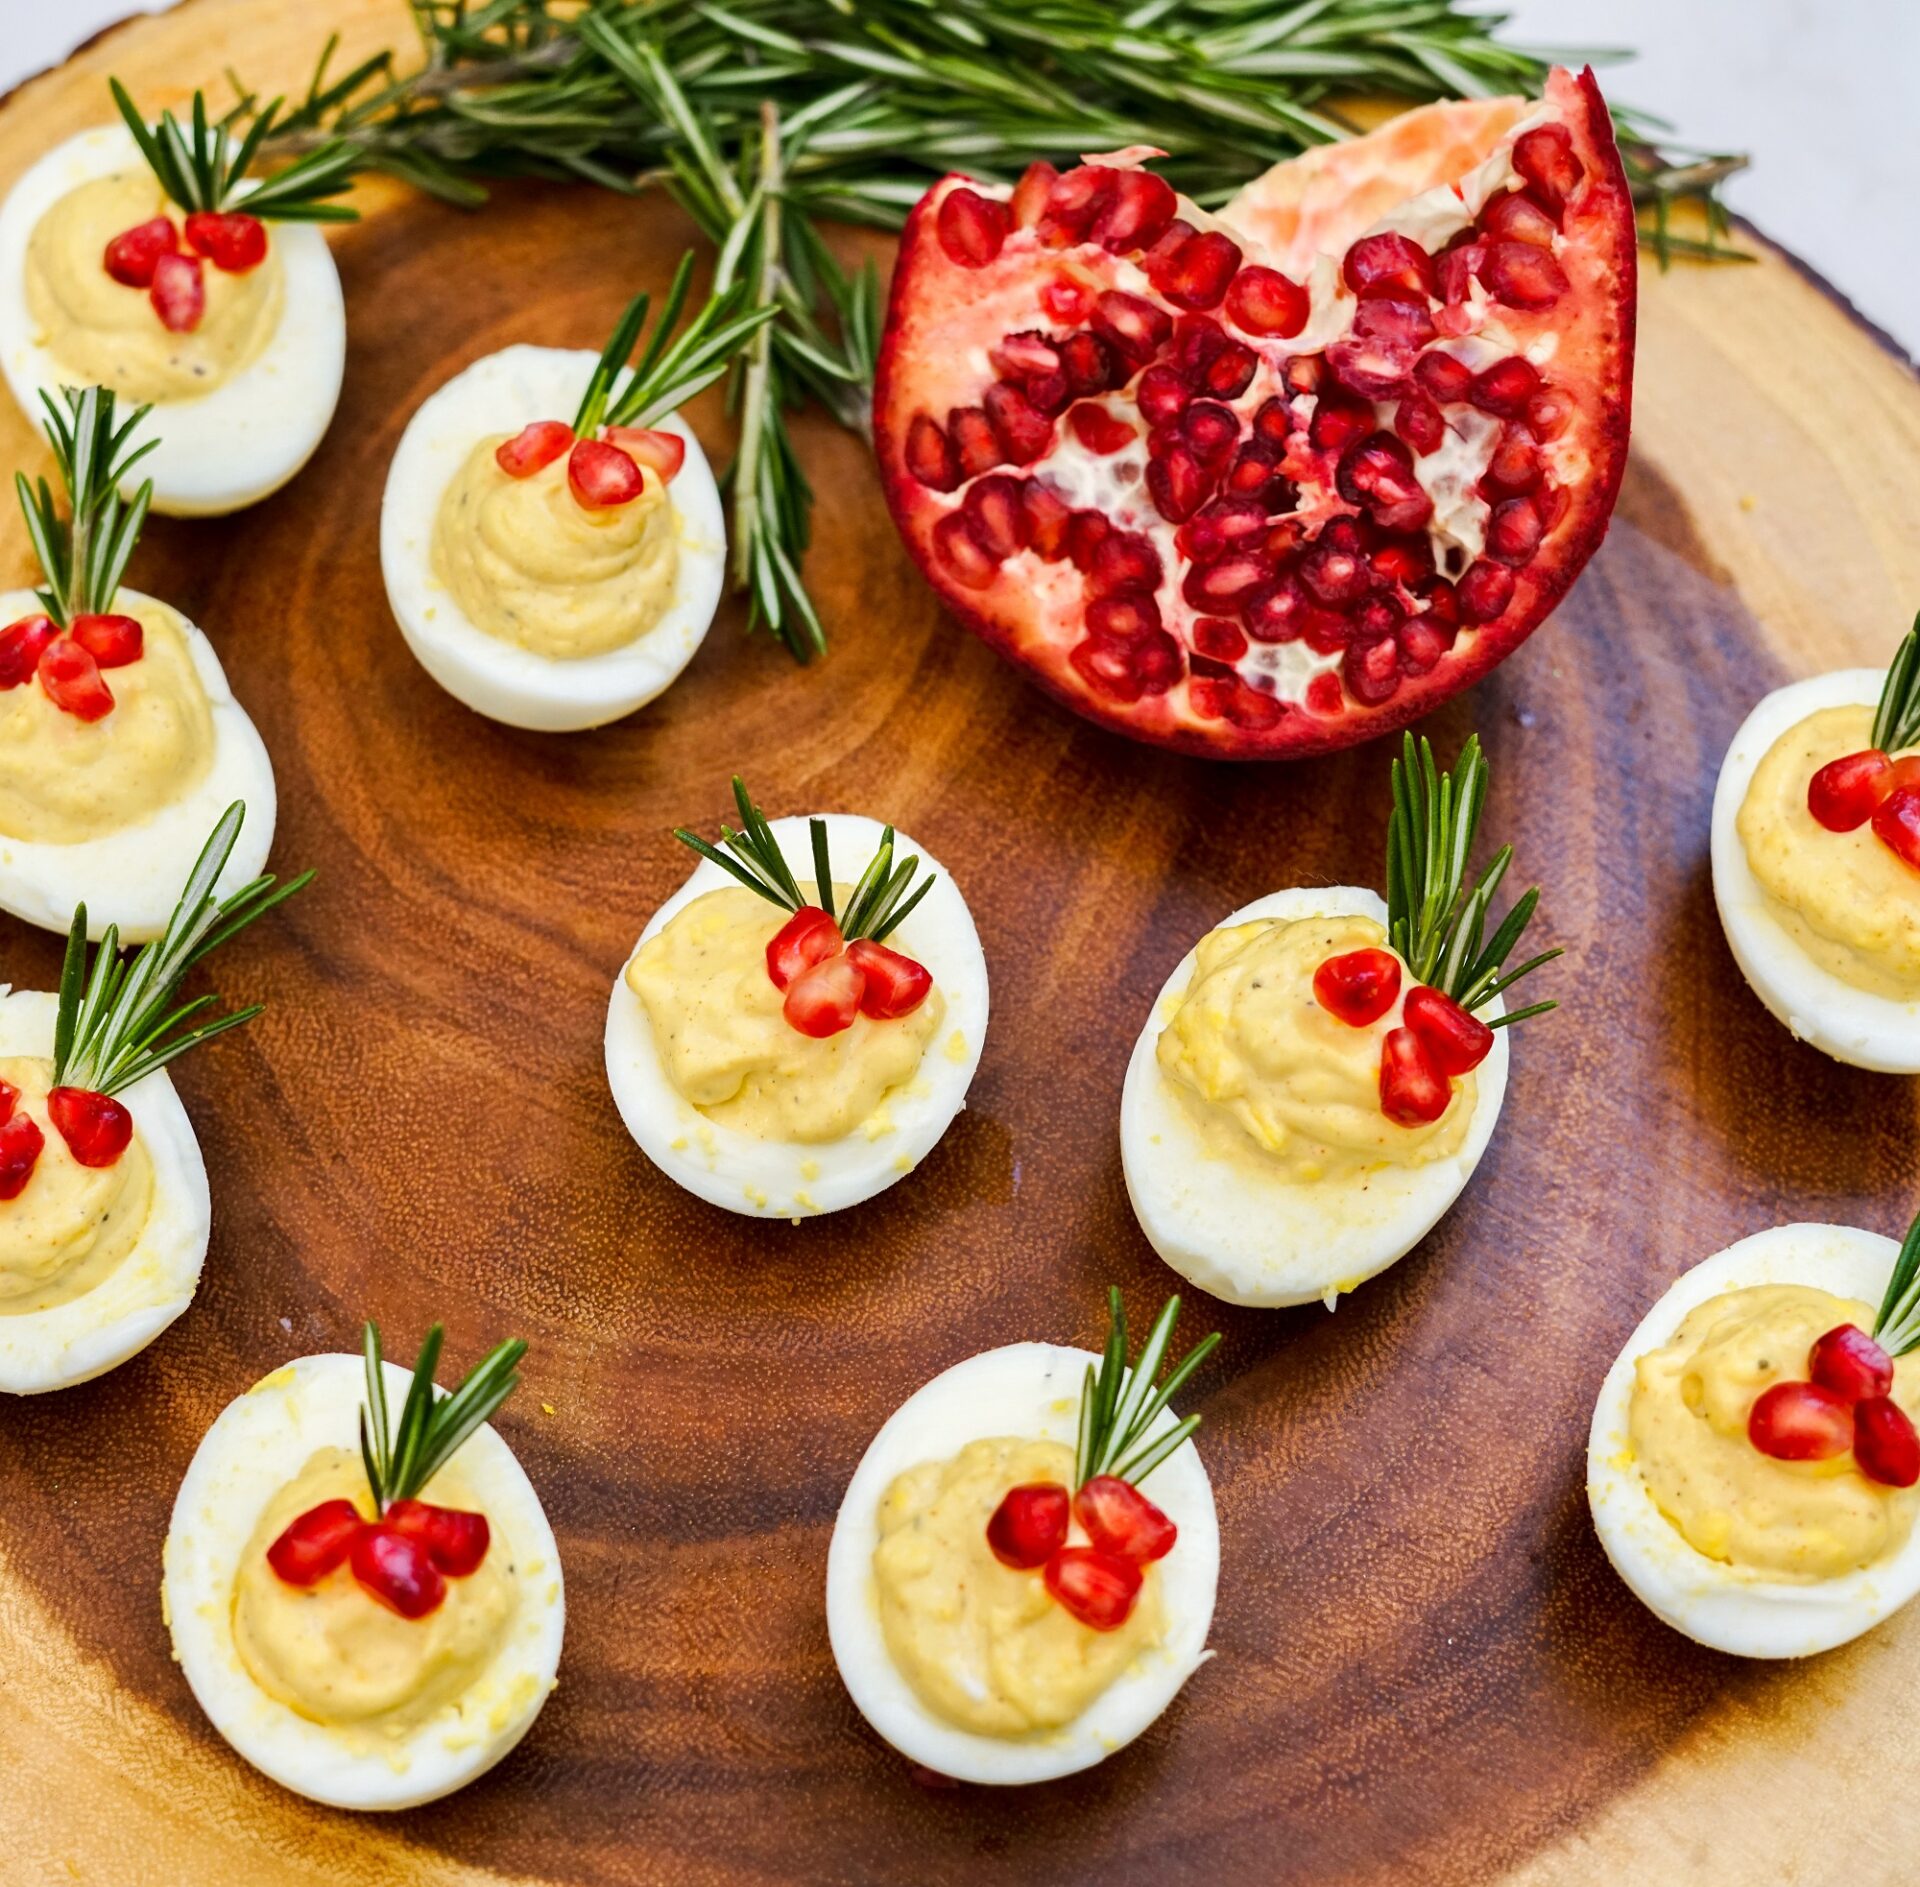 Deviled eggs with rosemary and pomegranate seeds on a wooden board.